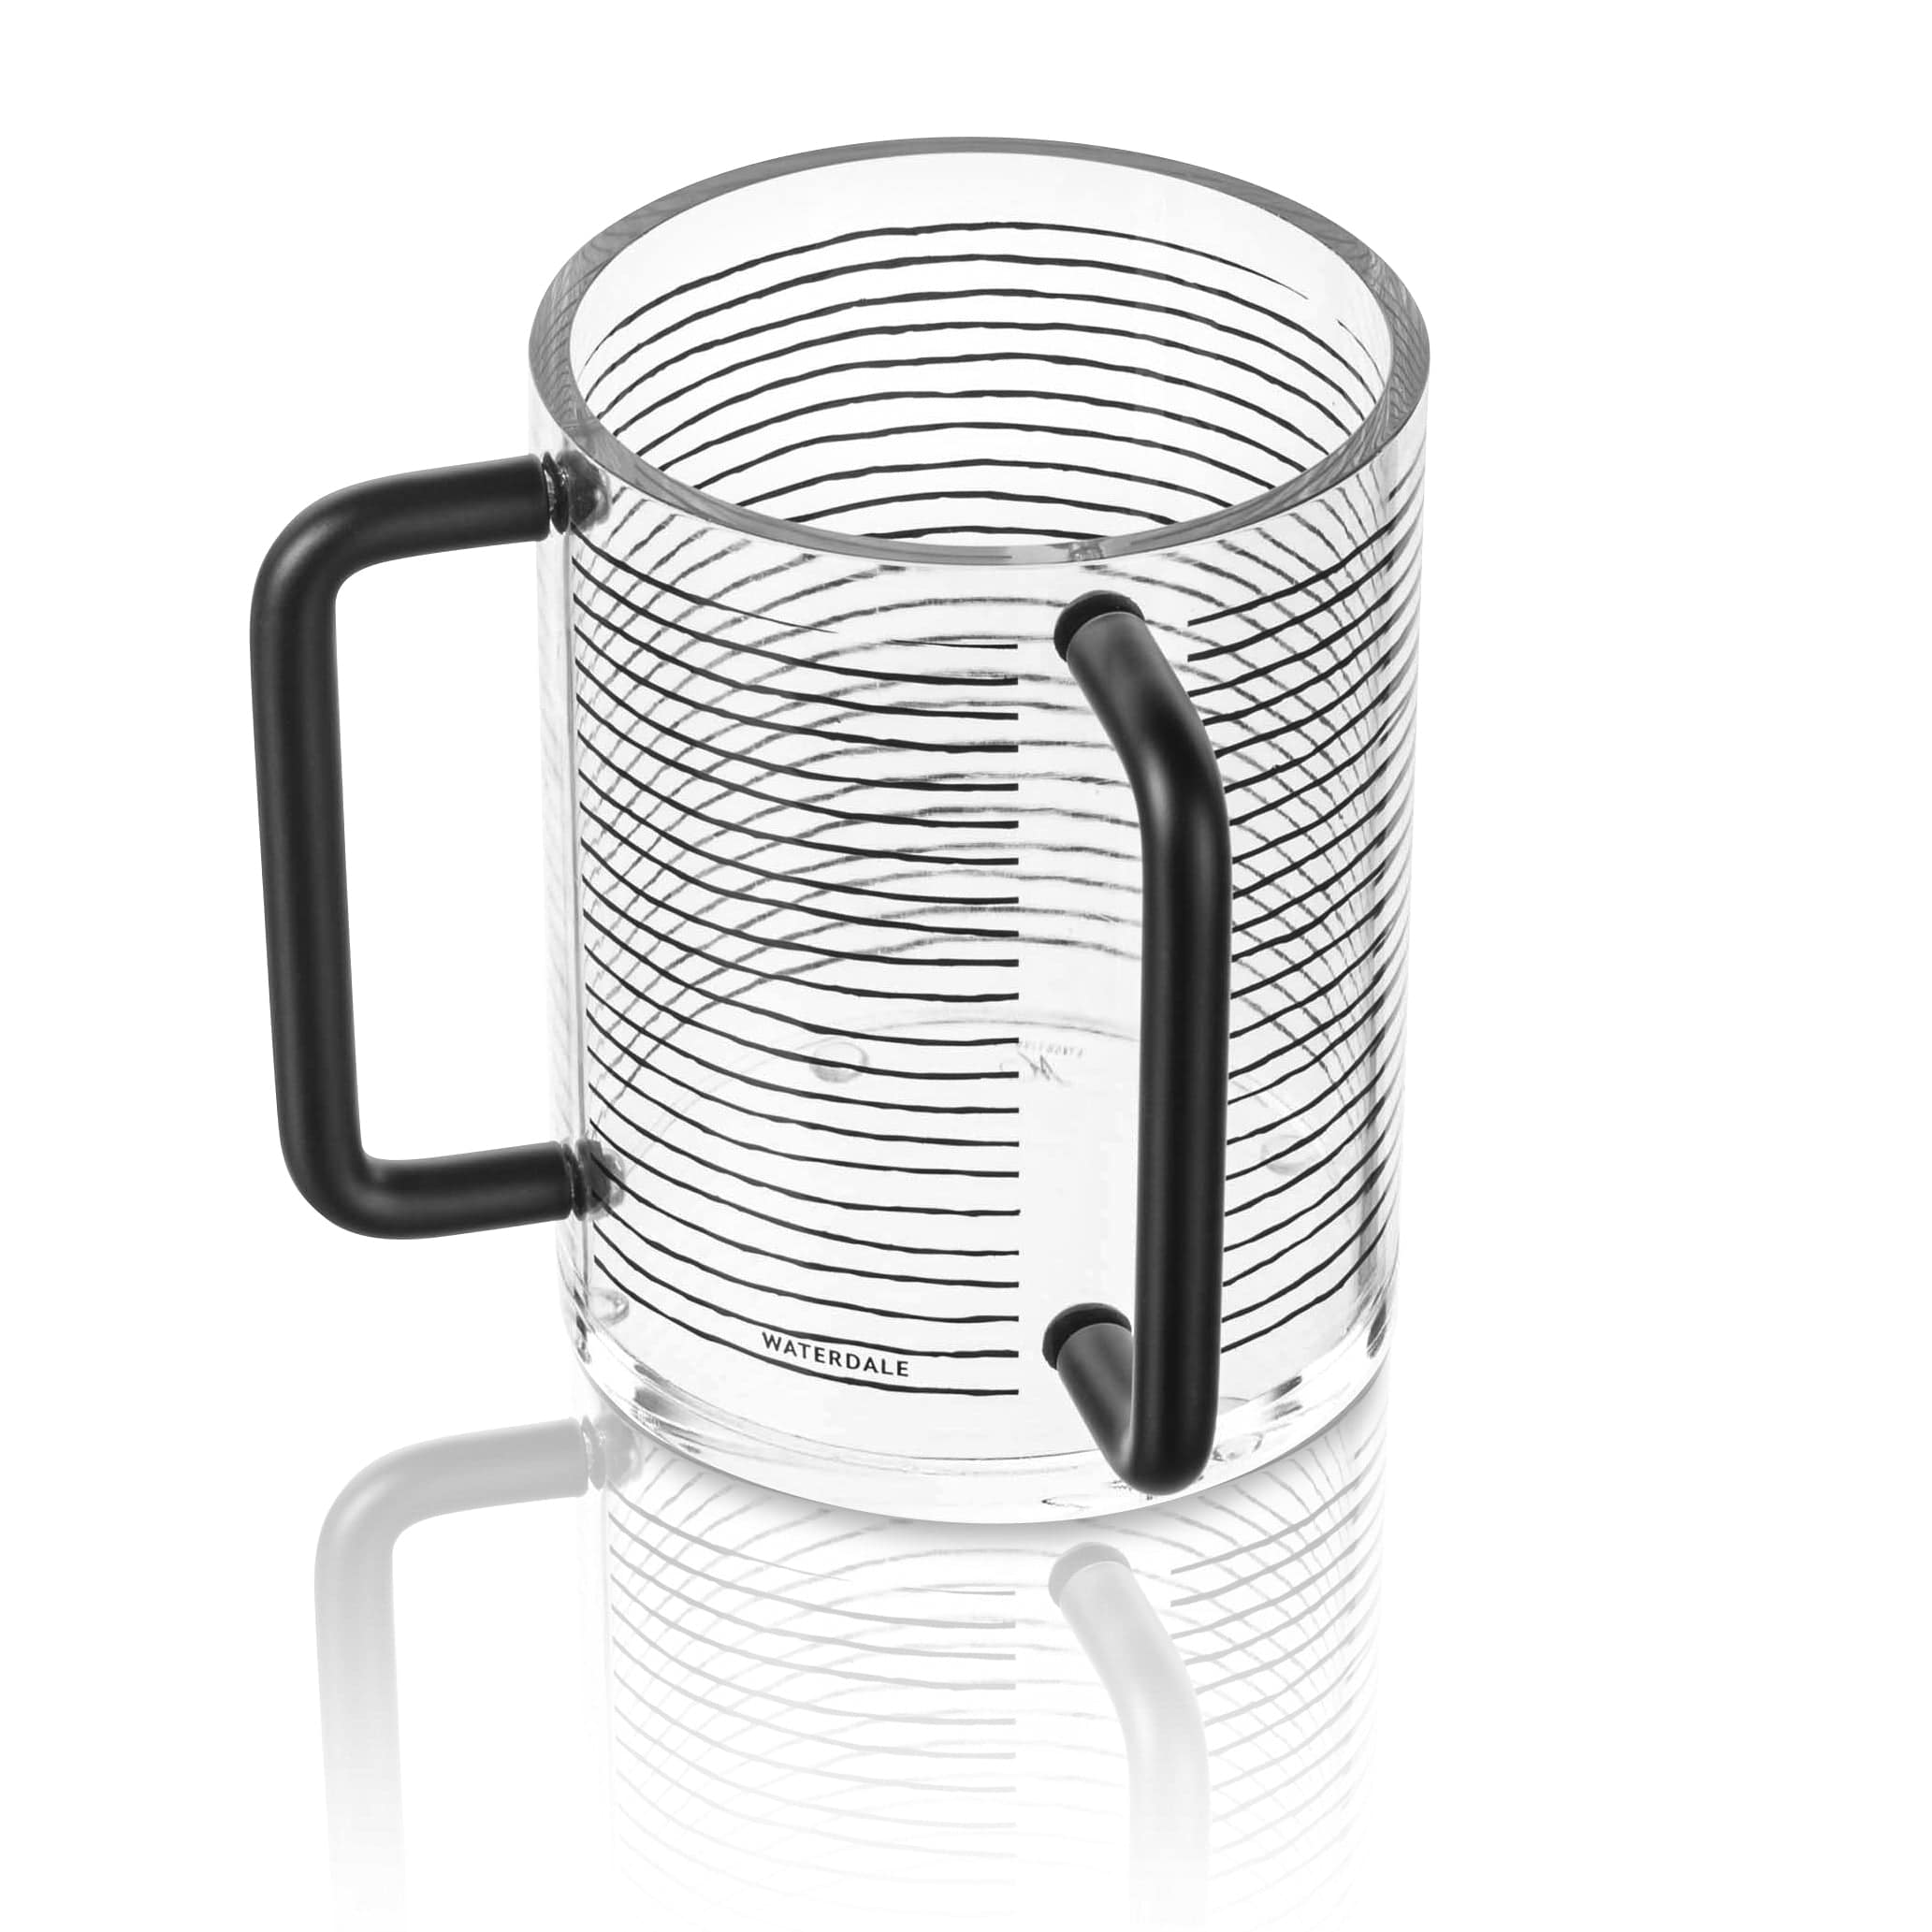 KS Inspired Washing Cup - Waterdale Collection